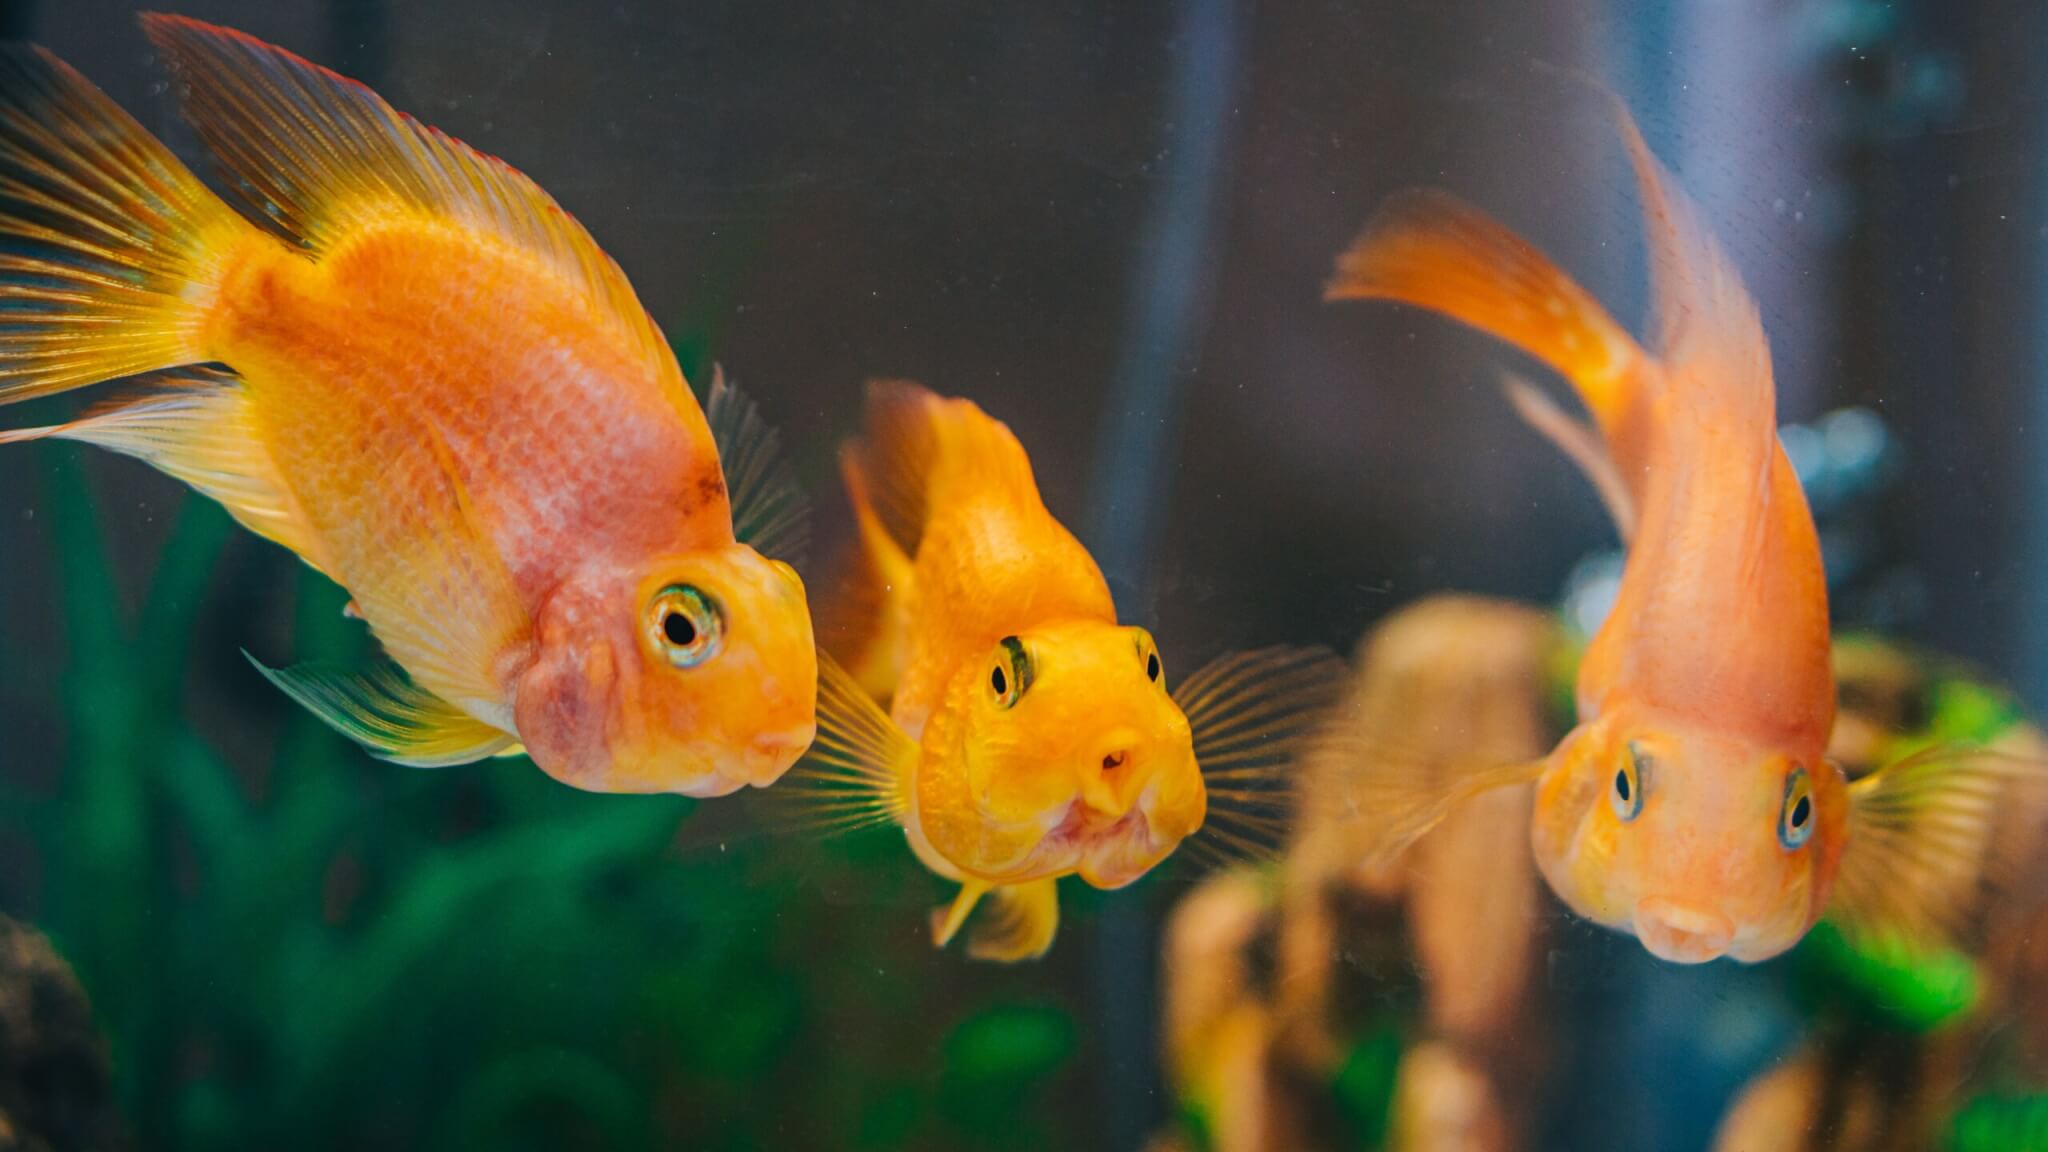 Goldfish aren’t as clueless as we think, show strong ability to estimate distances